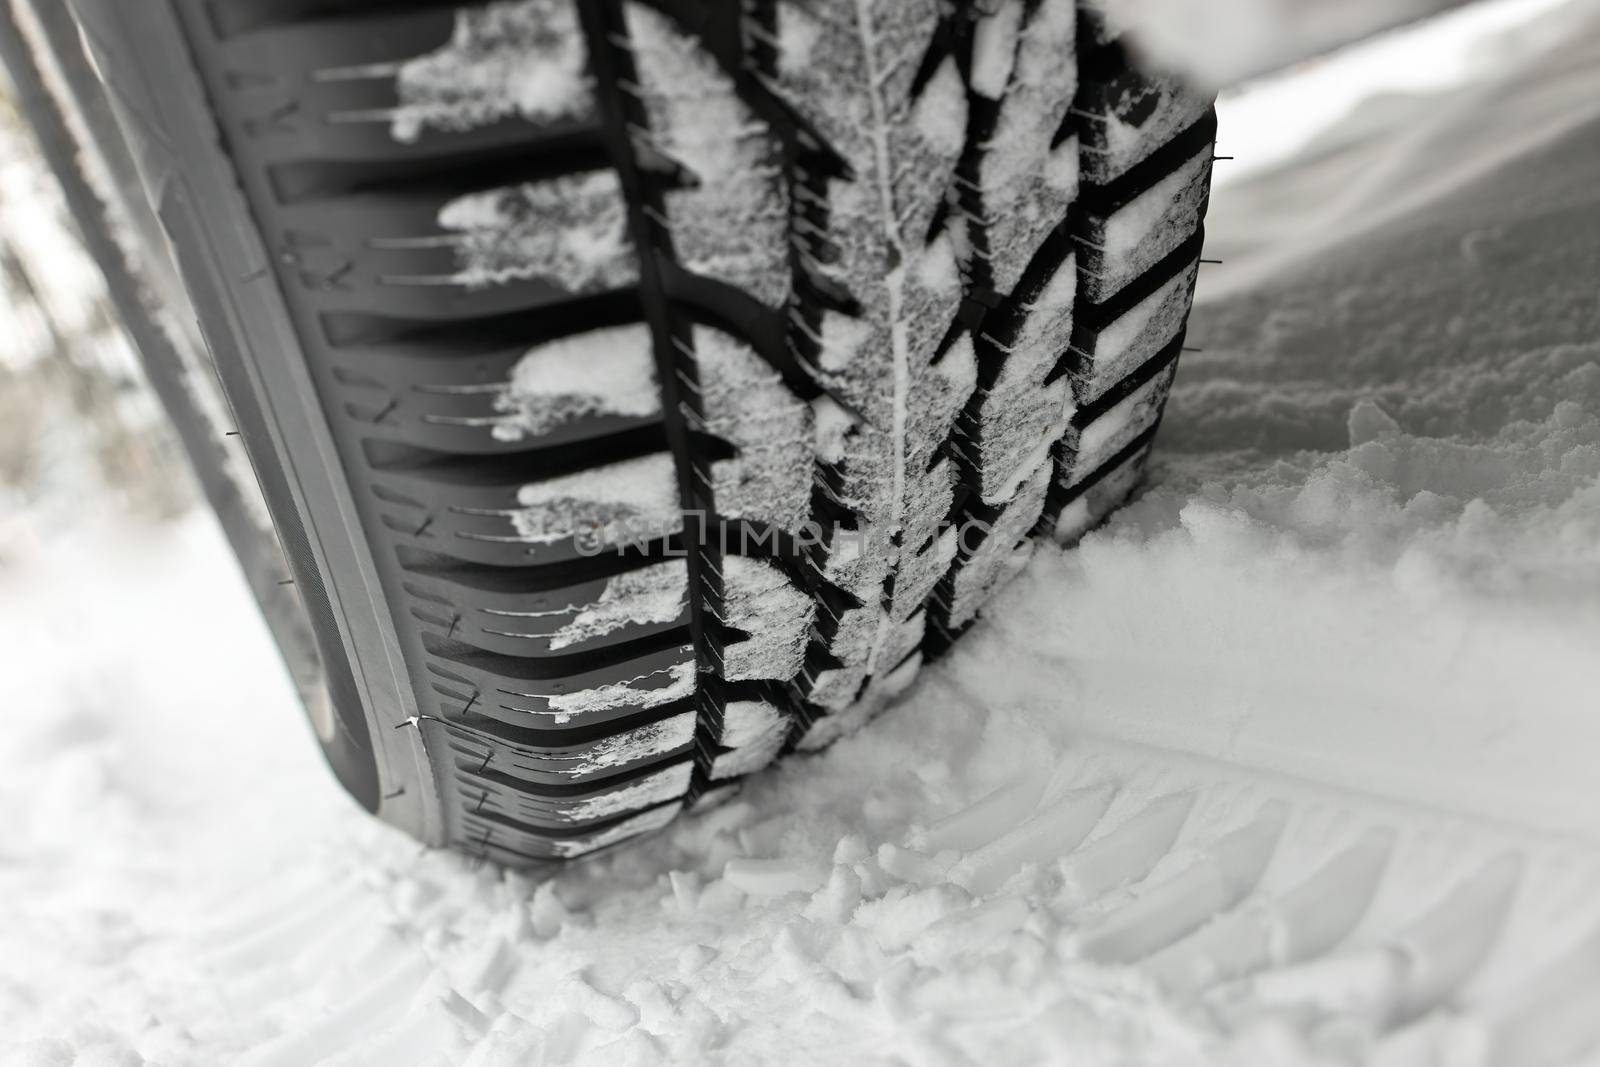 A snowy winter tire leaves a deep track in the snow. Snow clings to tire treads.